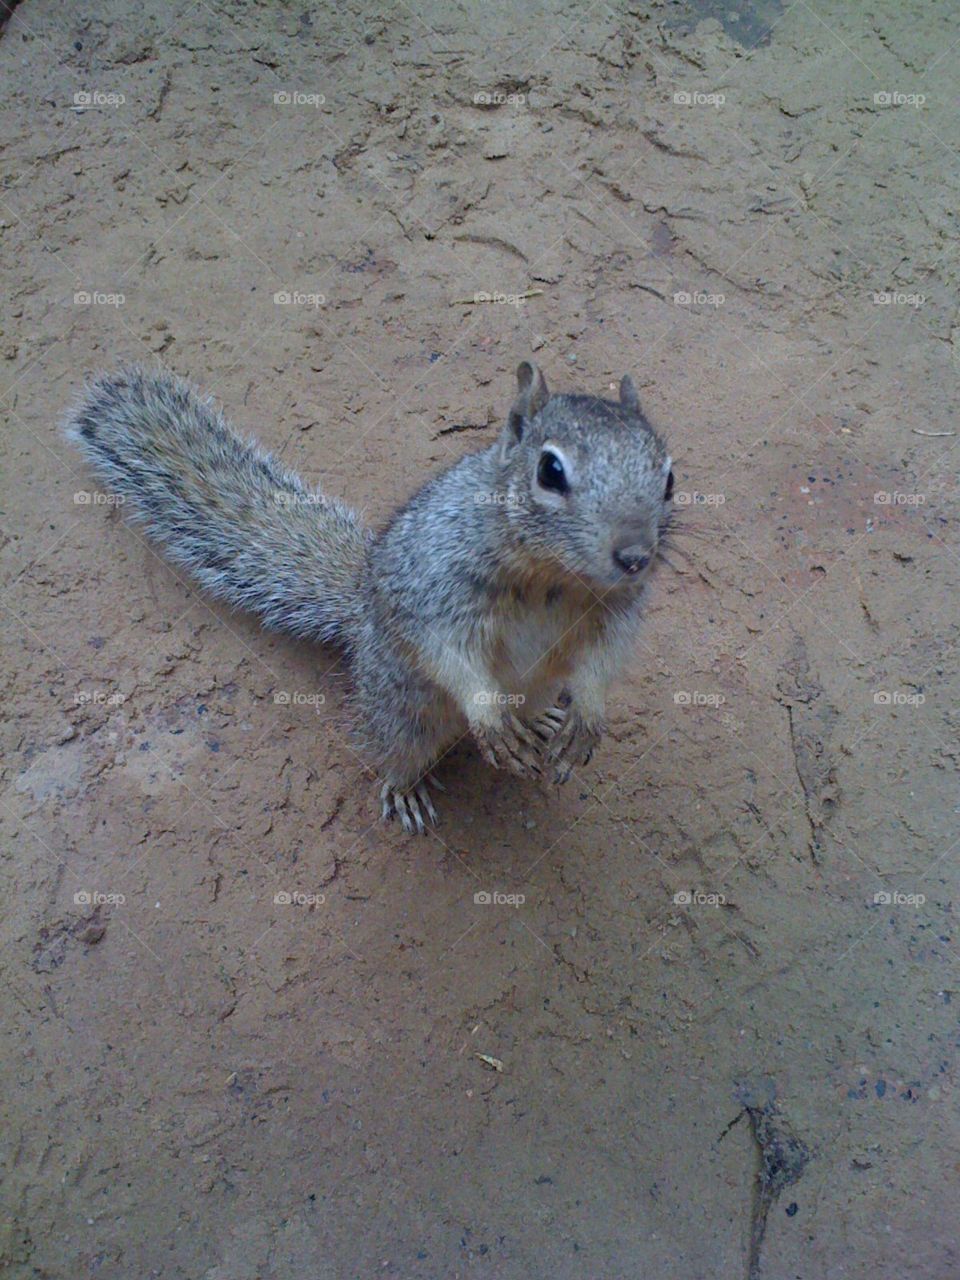 Squirrely squirrel curious in us along the path in Zion’s National Park, Utah.